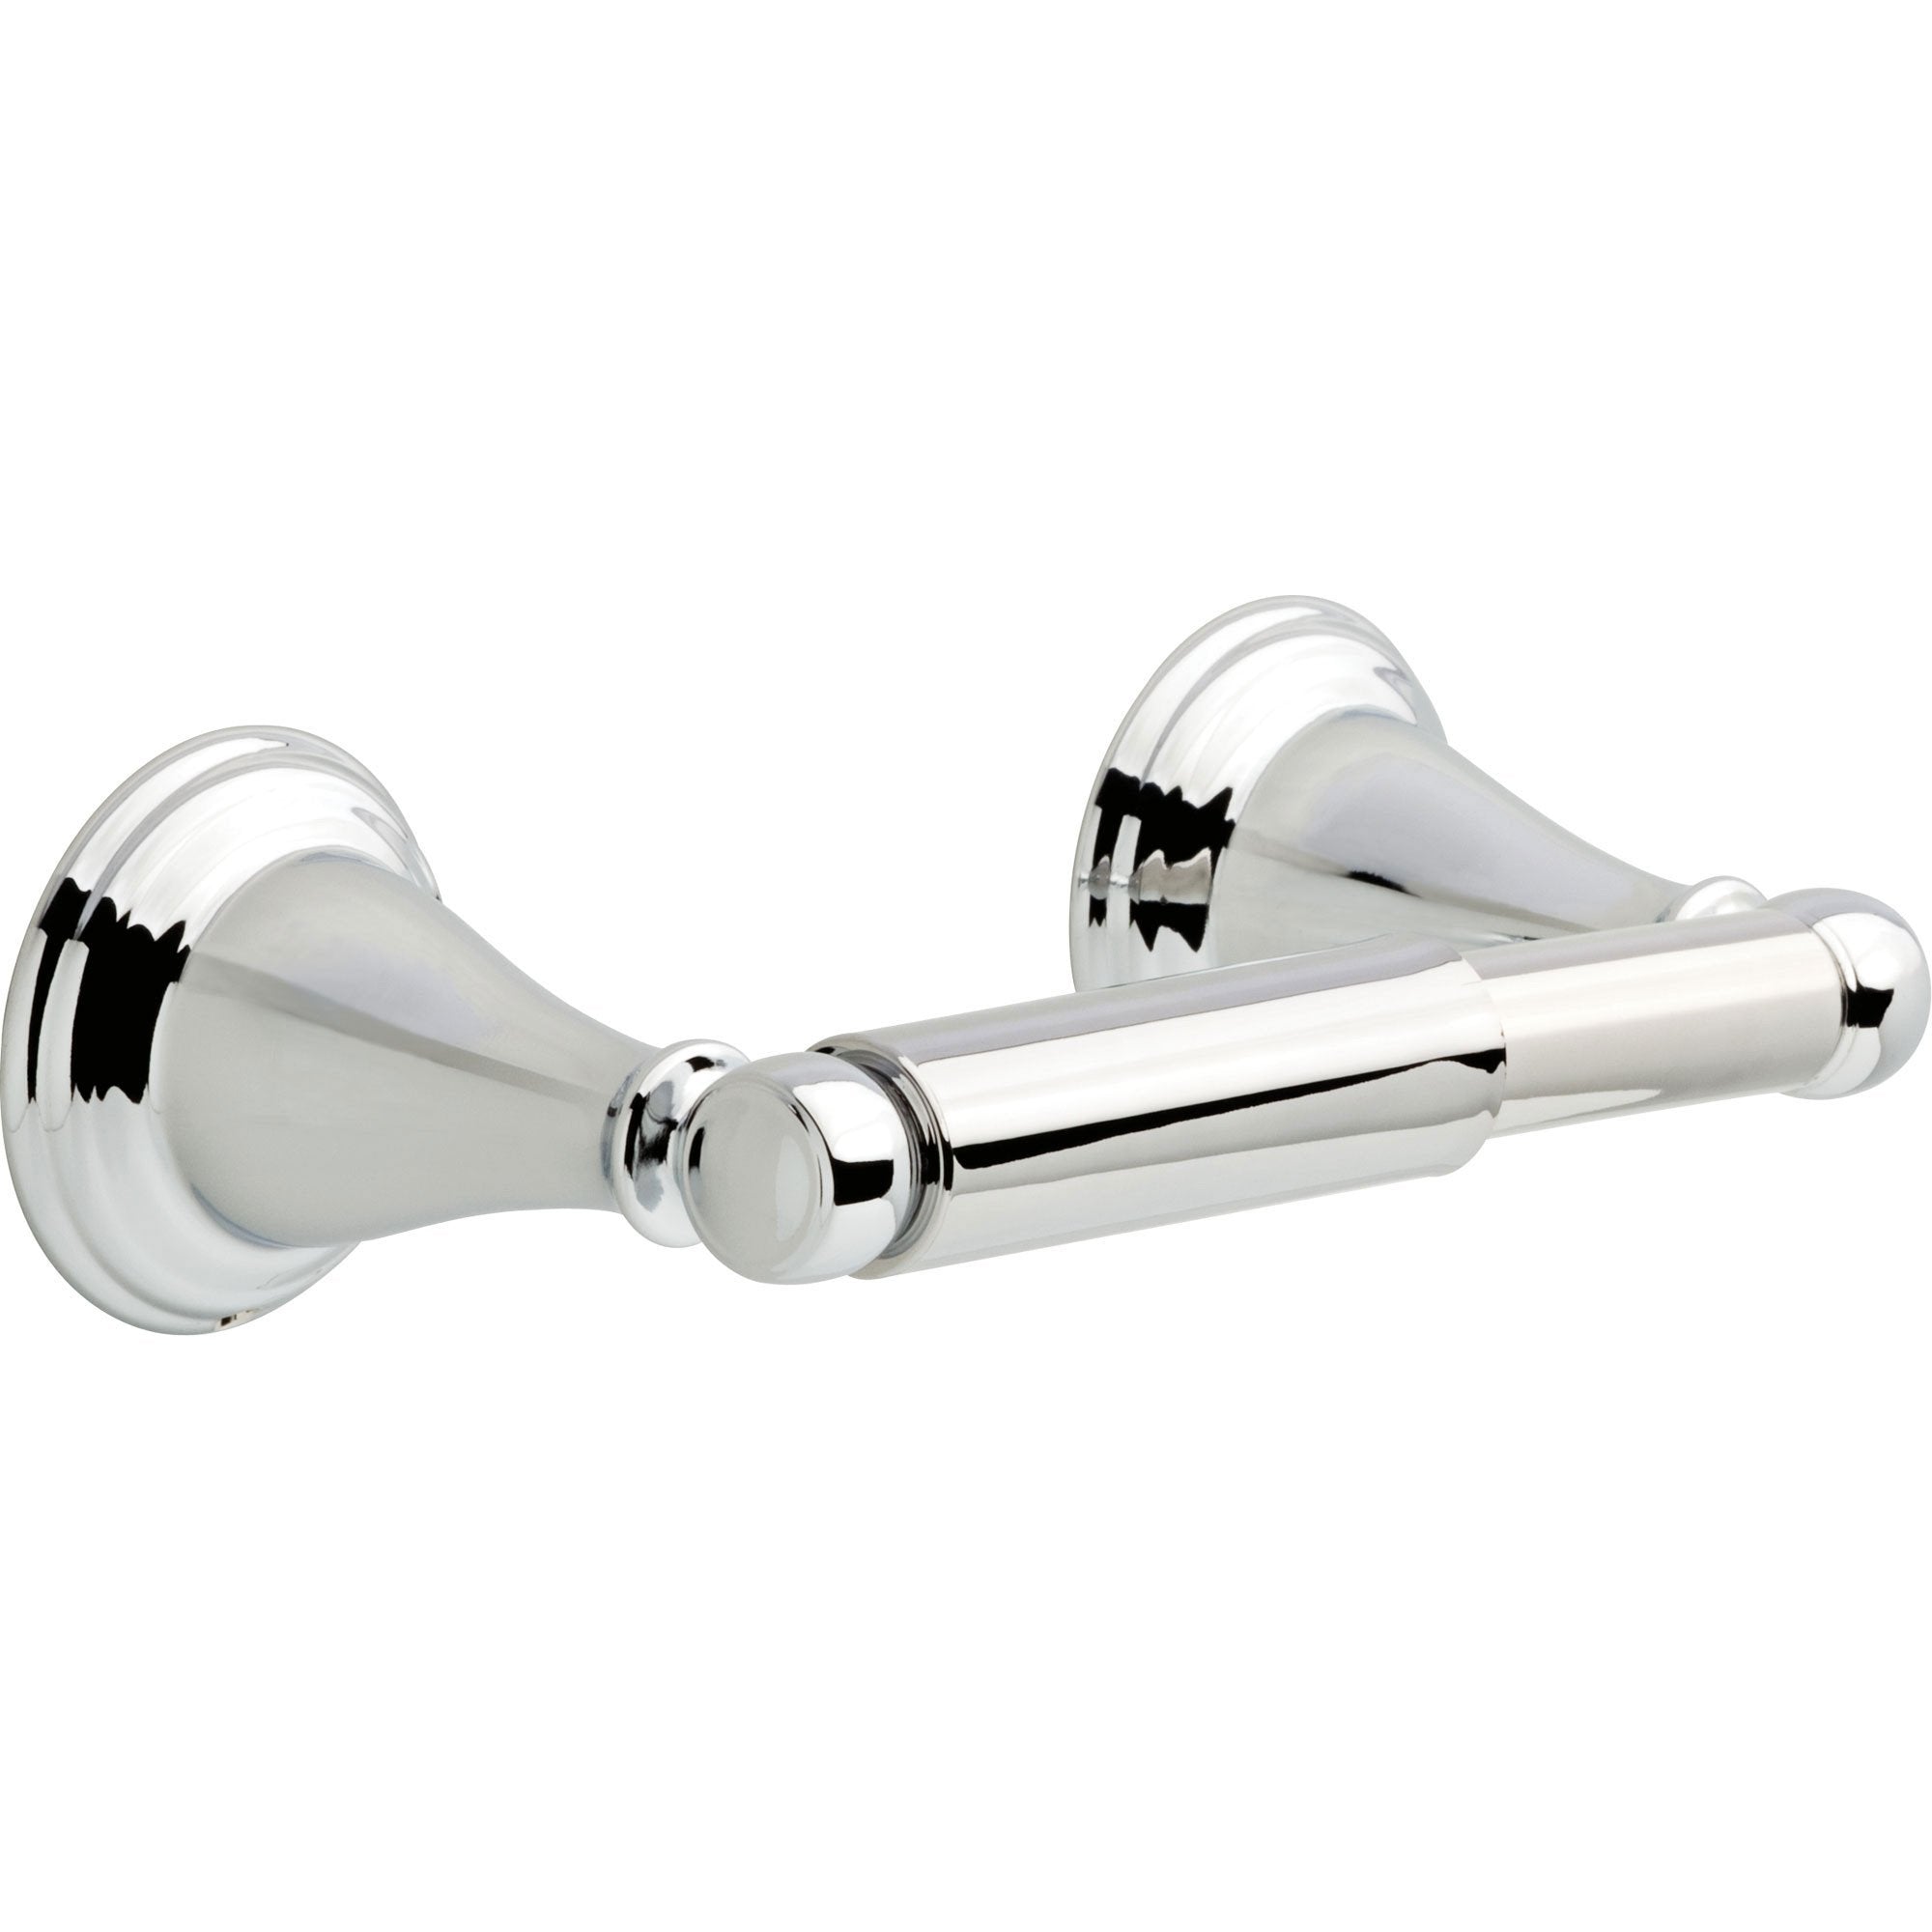 Delta Windemere Chrome Double Post Toilet Paper Holder 638708